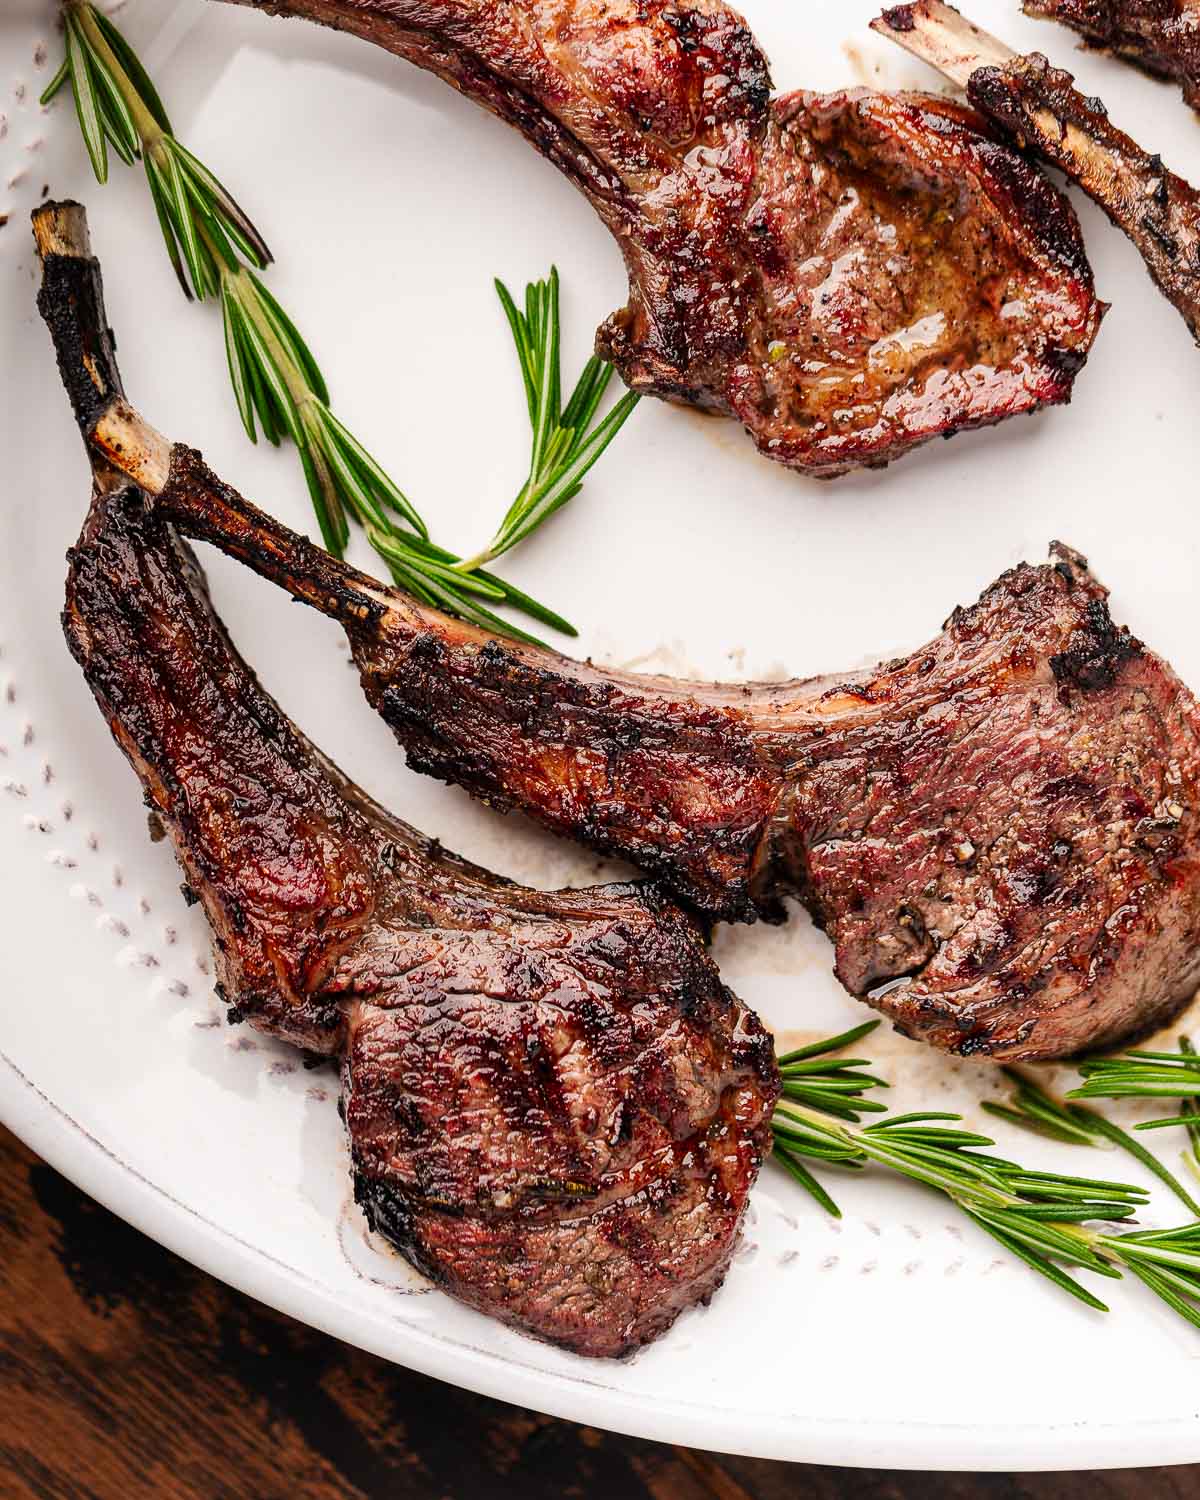 Grilled lamb chops on white plate with rosemary garnish.